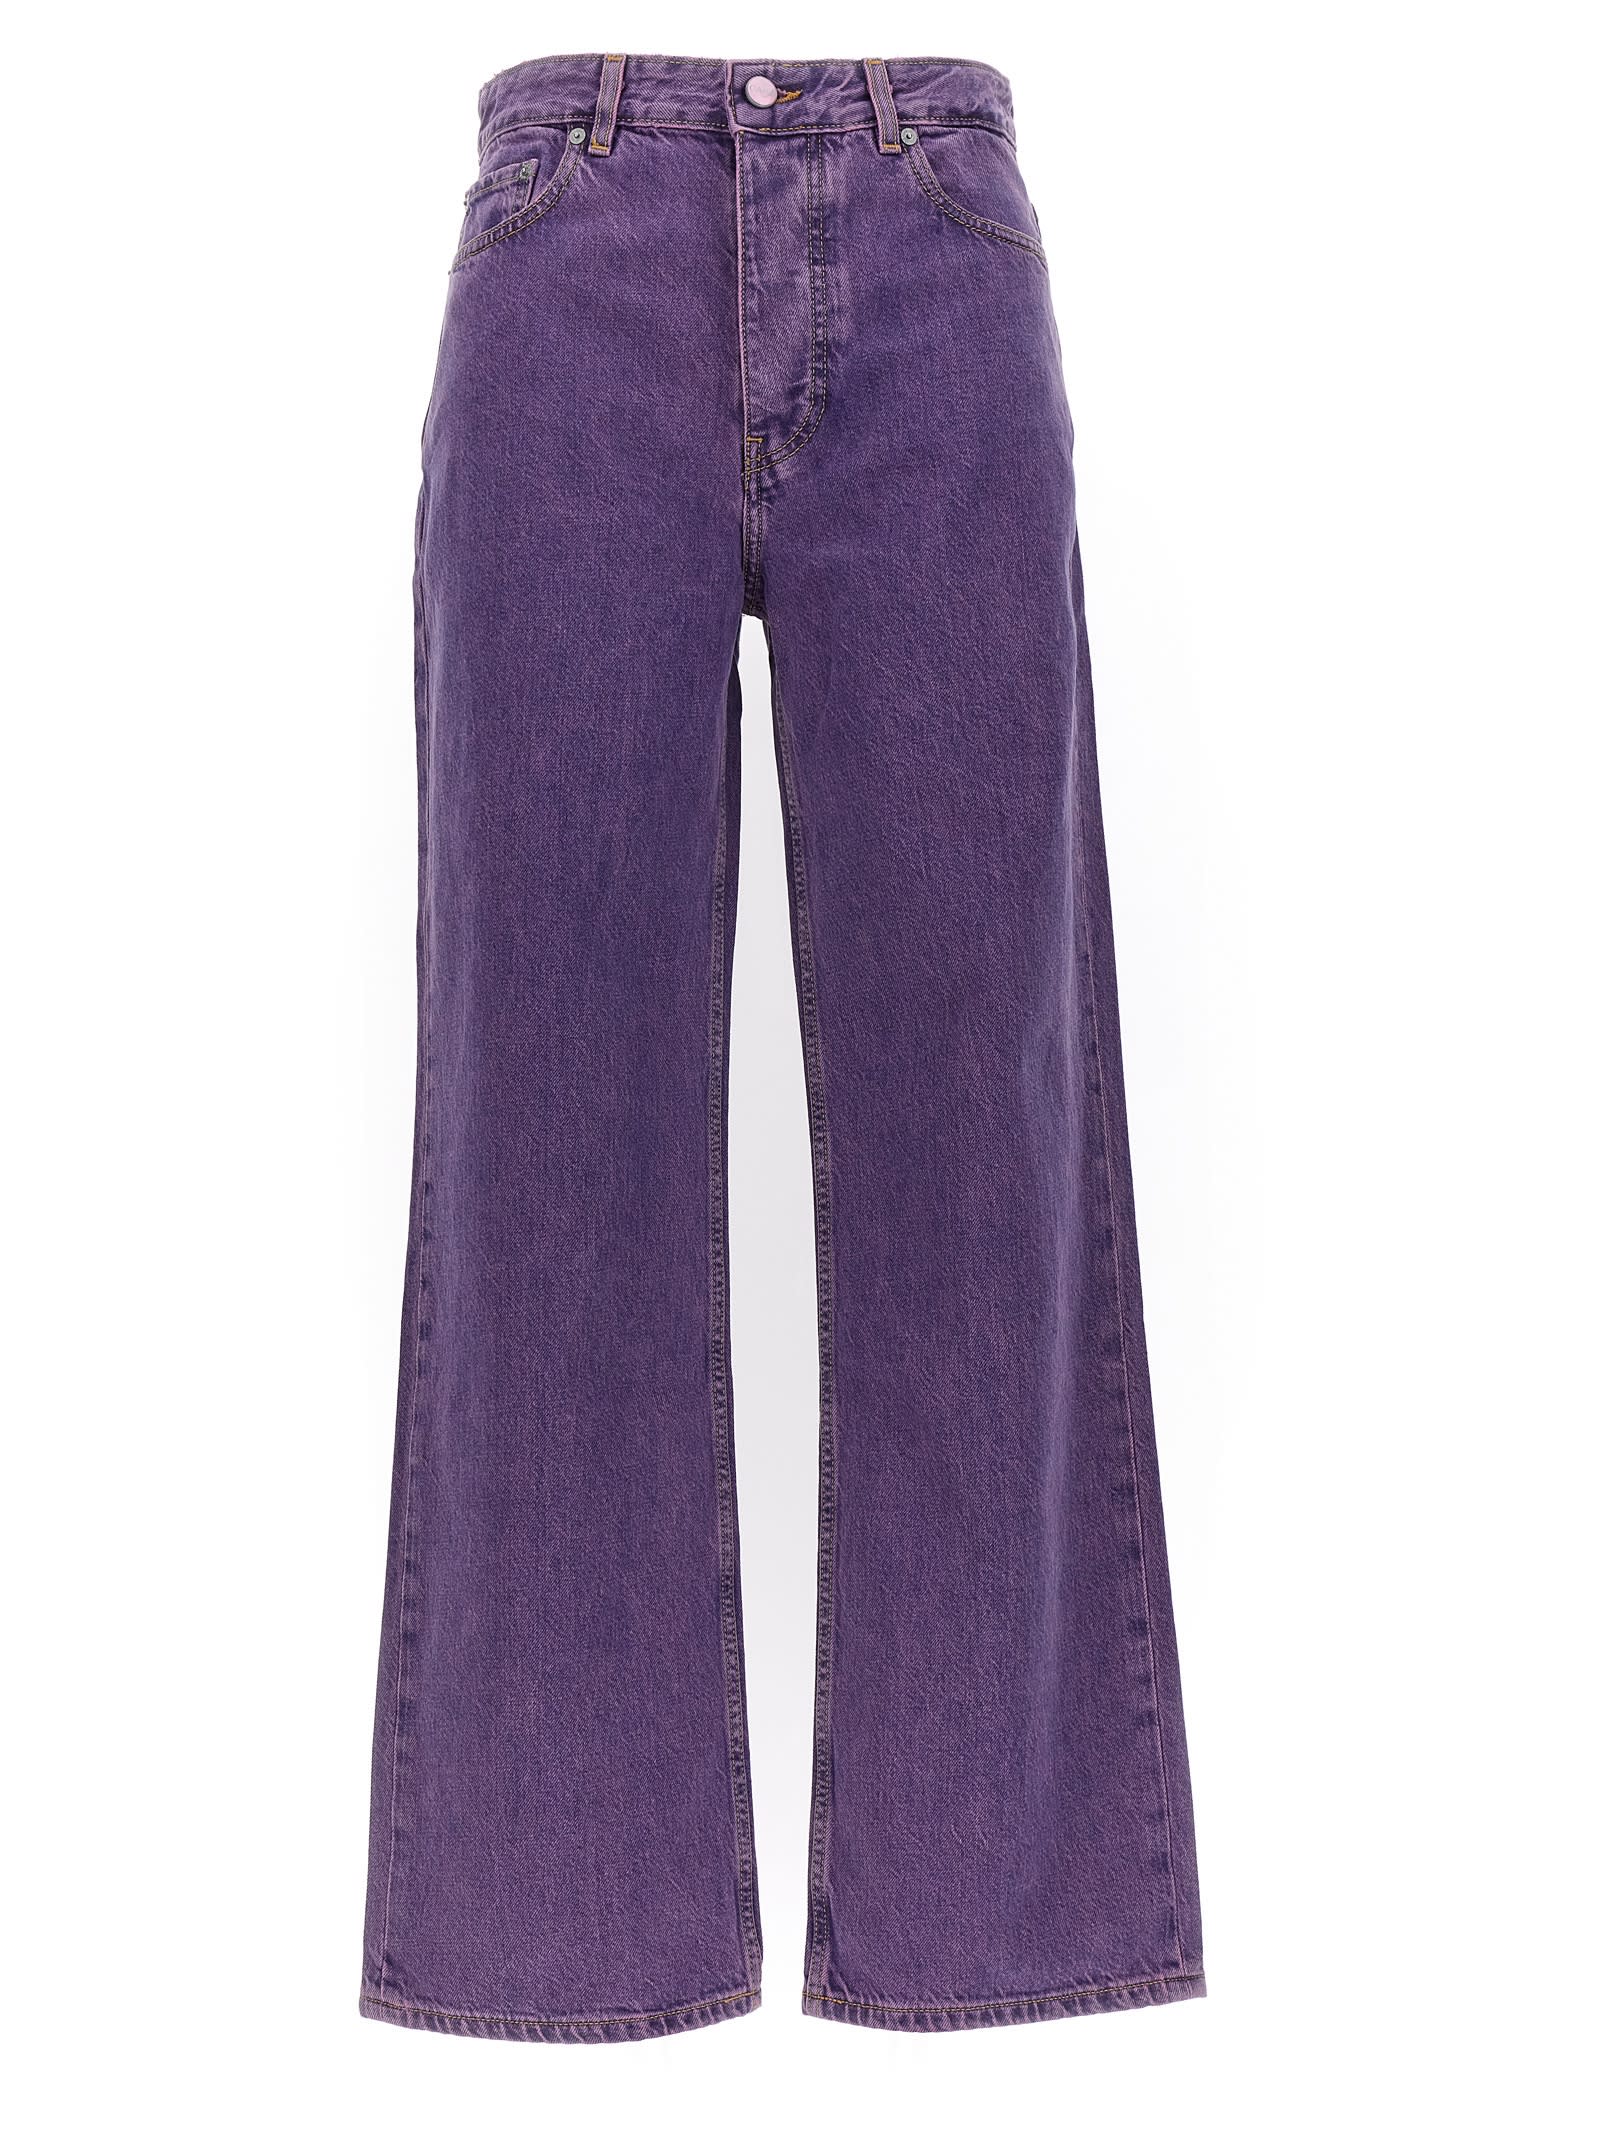 GANNI DYED JEANS